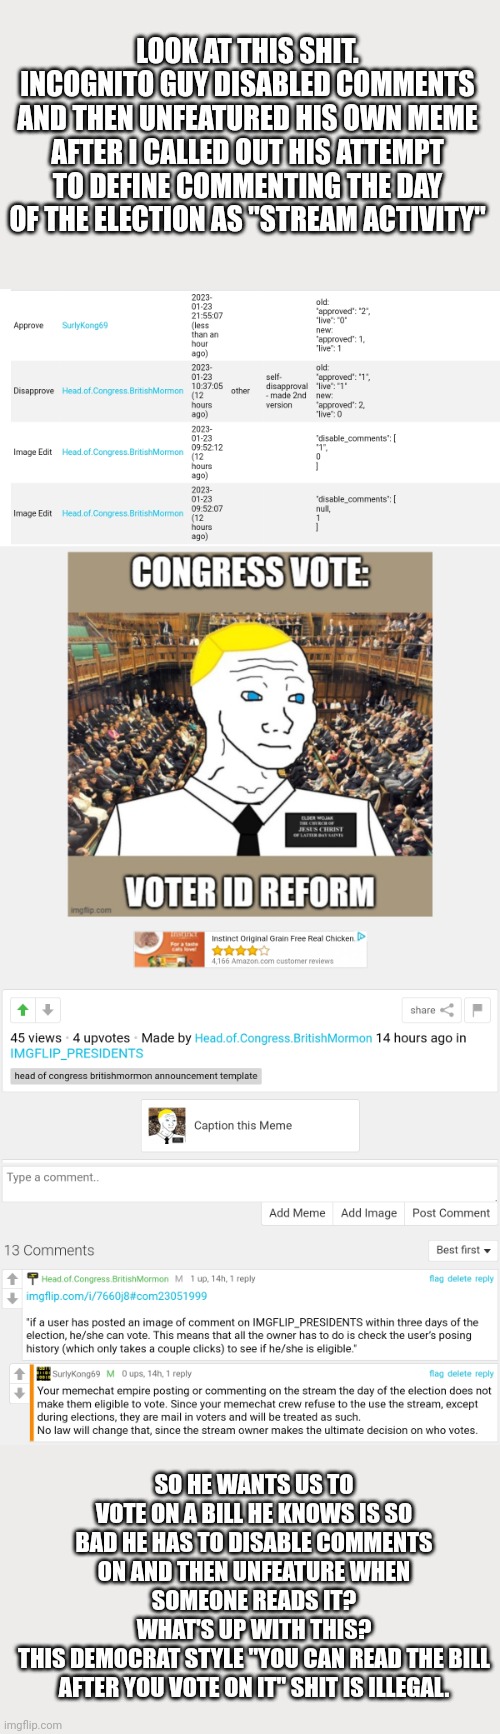 Why's Incognito afraid you'll comment on his bill? | LOOK AT THIS SHIT.
INCOGNITO GUY DISABLED COMMENTS AND THEN UNFEATURED HIS OWN MEME AFTER I CALLED OUT HIS ATTEMPT TO DEFINE COMMENTING THE DAY OF THE ELECTION AS "STREAM ACTIVITY"; SO HE WANTS US TO VOTE ON A BILL HE KNOWS IS SO BAD HE HAS TO DISABLE COMMENTS ON AND THEN UNFEATURE WHEN SOMEONE READS IT?
WHAT'S UP WITH THIS?
THIS DEMOCRAT STYLE "YOU CAN READ THE BILL AFTER YOU VOTE ON IT" SHIT IS ILLEGAL. | image tagged in guess whos,hiding with biden,again | made w/ Imgflip meme maker